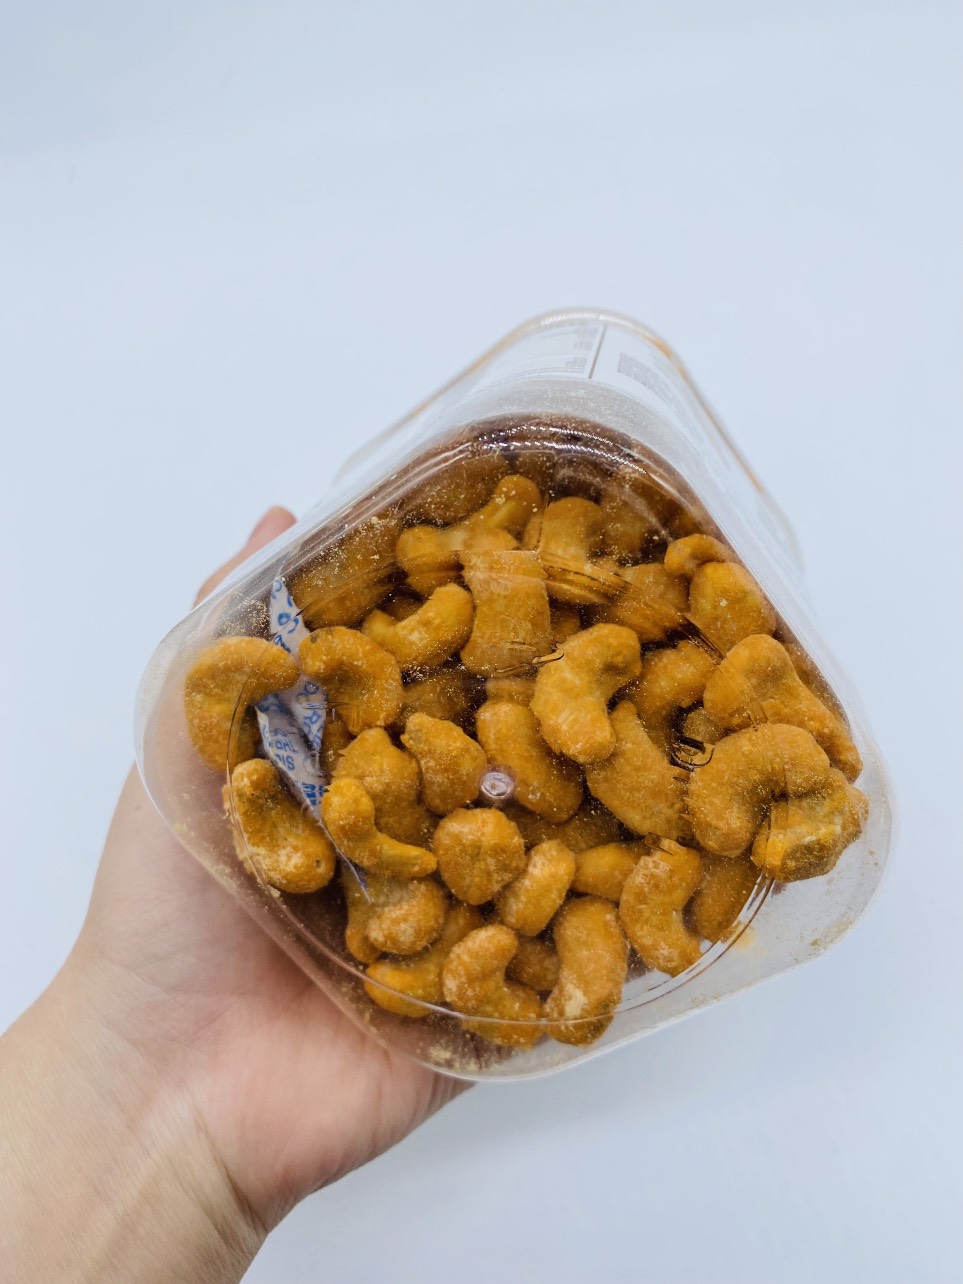 Eating Roasted Cashew Nuts- A Must-try Healthy Snack